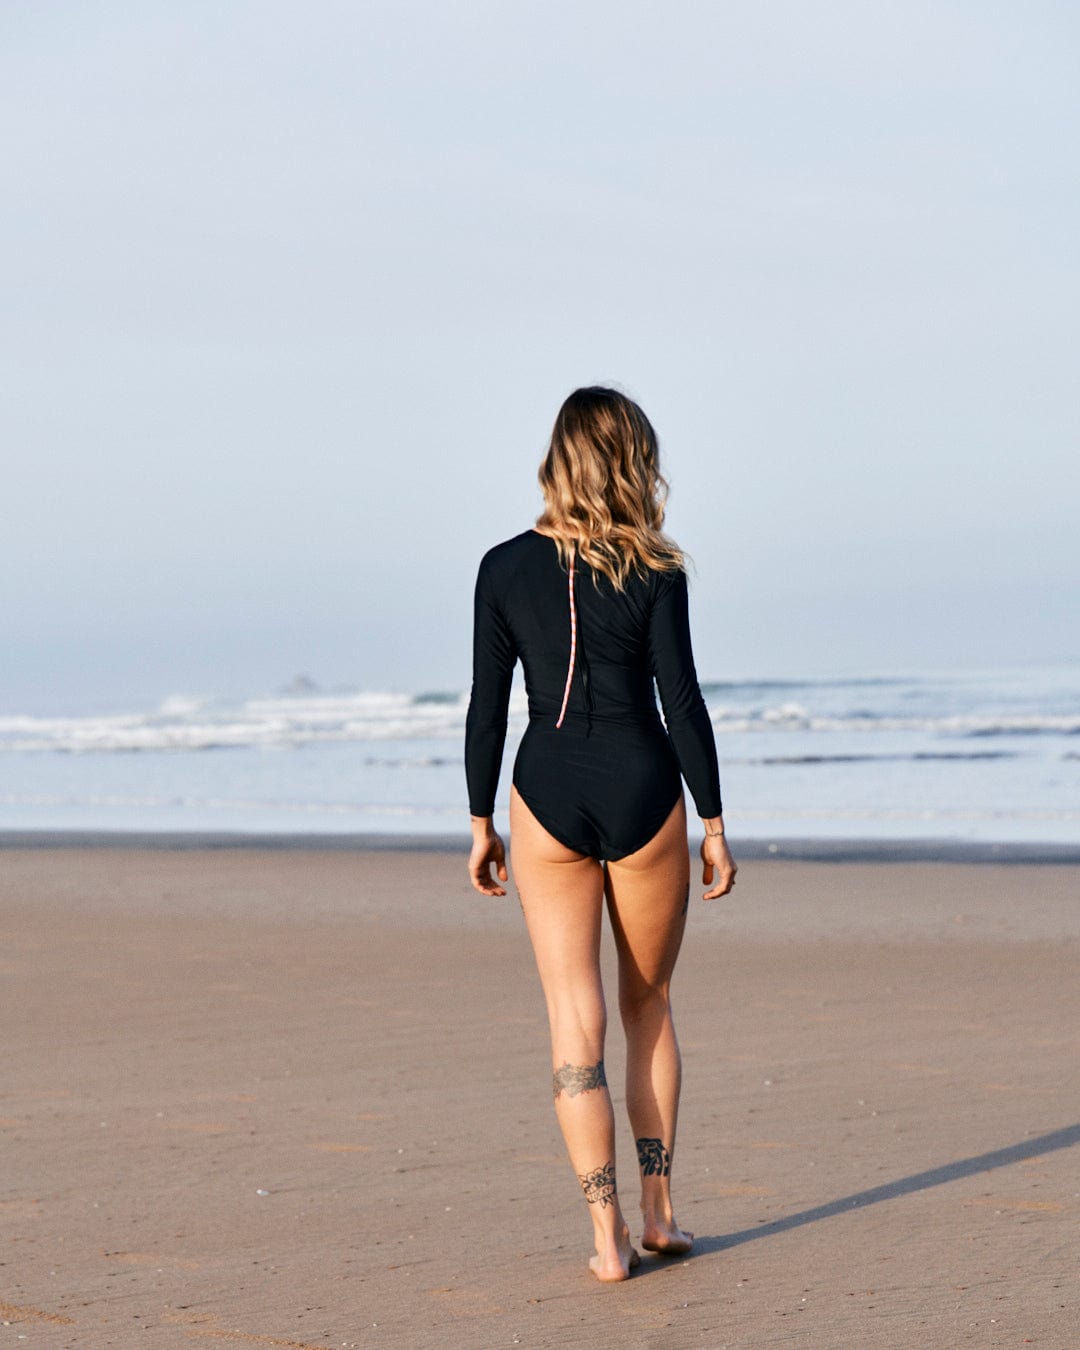 A woman in a Saltrock Cora Retro - Recycled Womens Long Sleeve Swimsuit - Dark Grey walks toward the ocean on a beach, viewed from behind, with a tattoo visible on her left thigh.